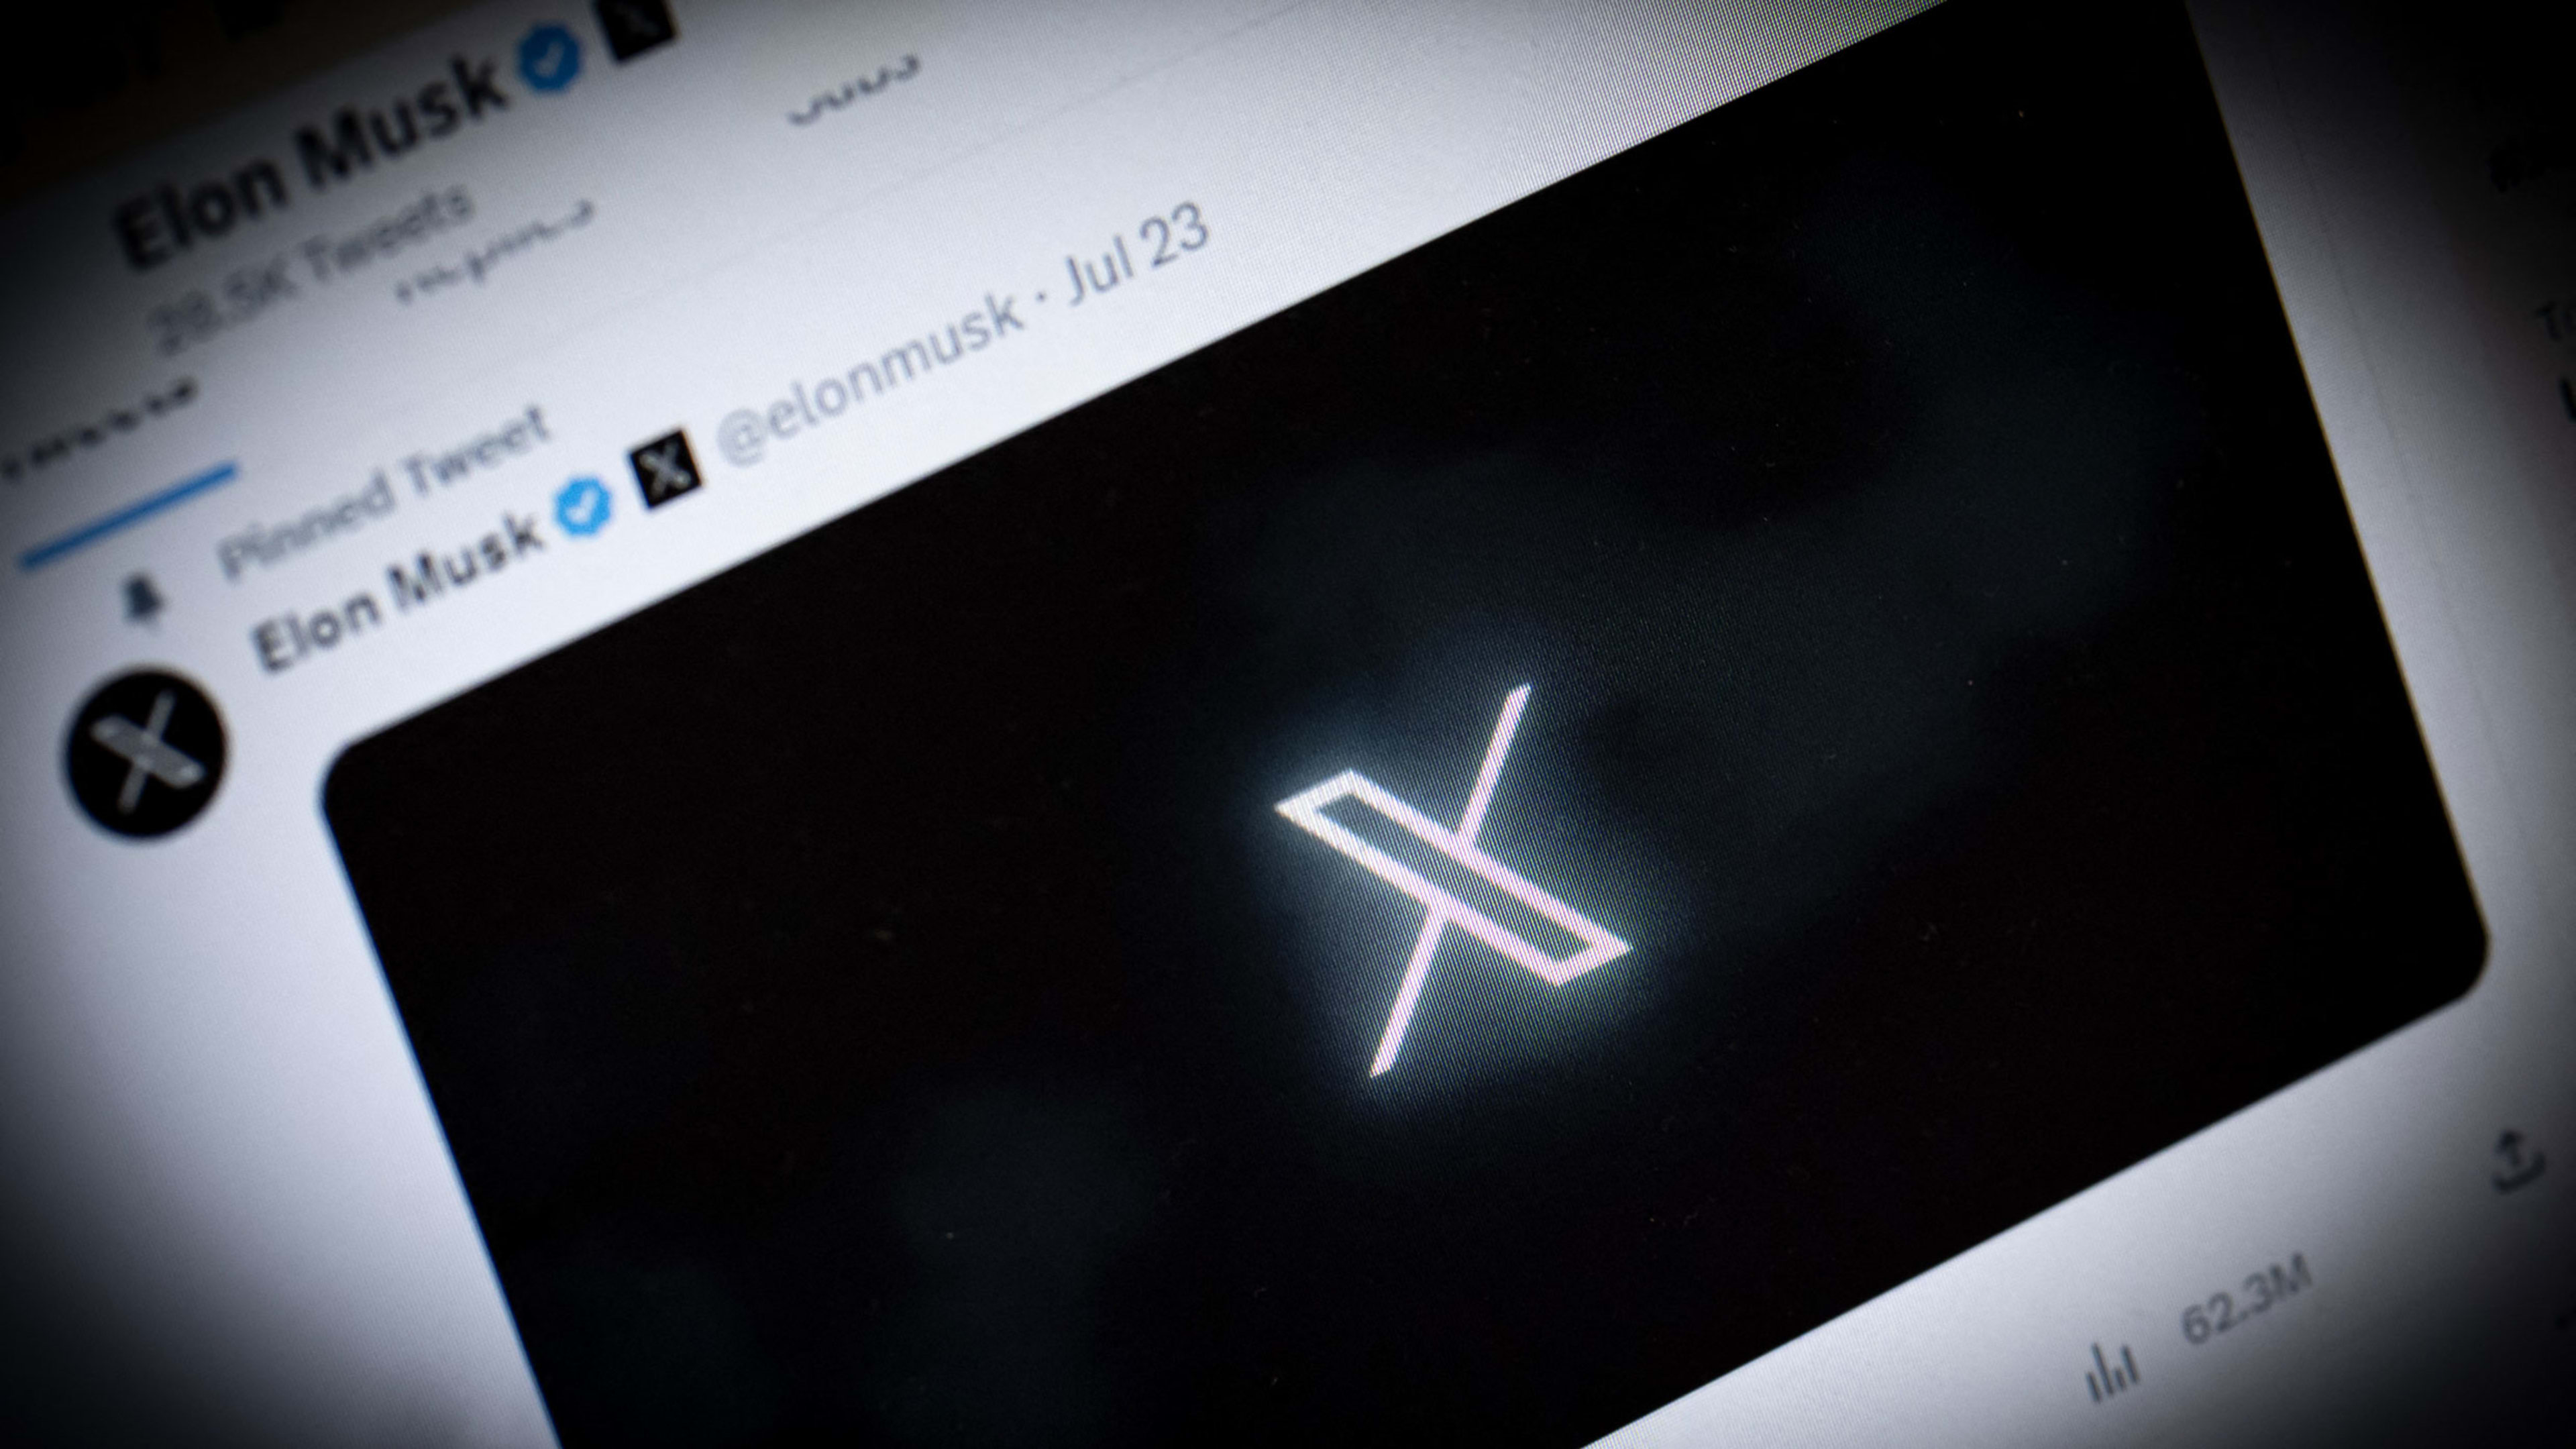 Twitter’s rebrand to X is destined to fail, critics say